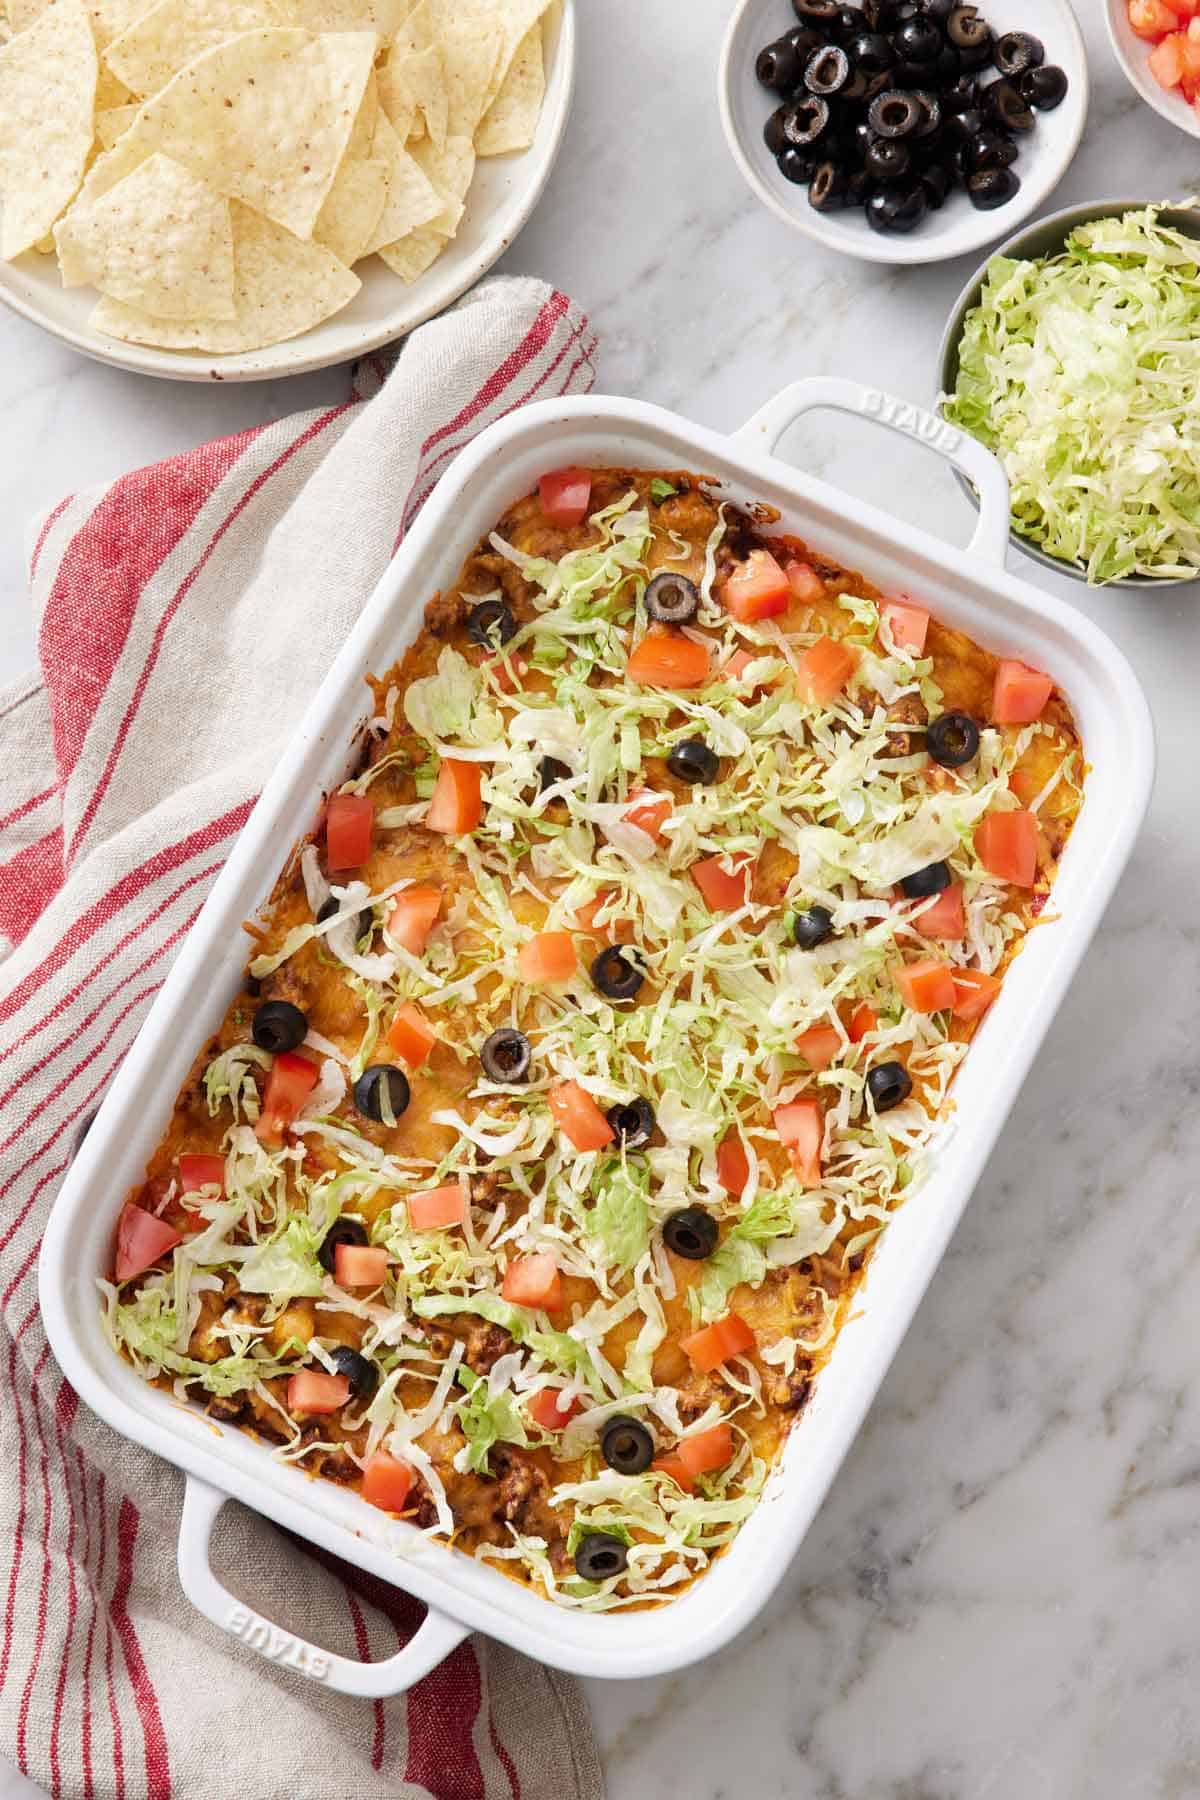 Overhead view of a baking dish with a taco casserole topped with shredded lettuce, diced tomatoes, and olives. More toppings and tortilla chips on the side.